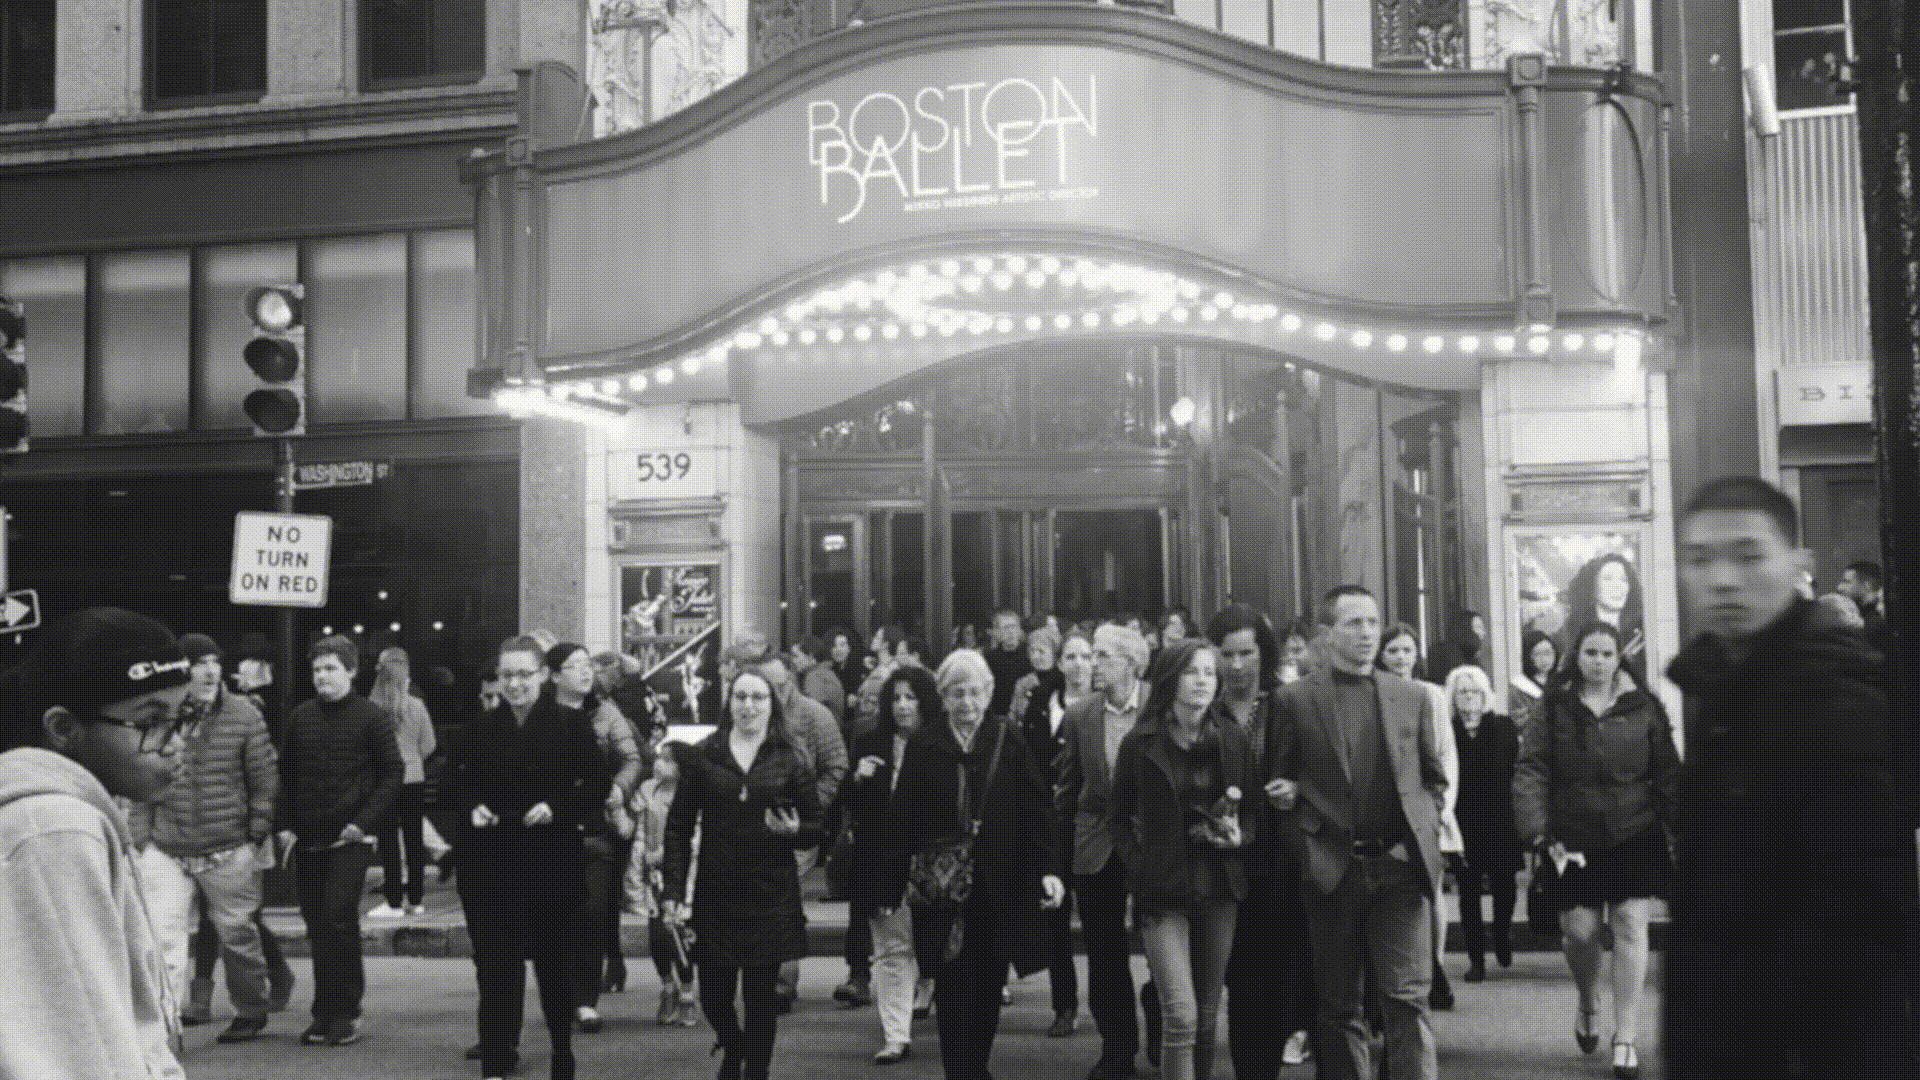 This moving gif is in black and white and shows a crowd of people pouring out of the front doors of Paramount Theater after the end of a show.